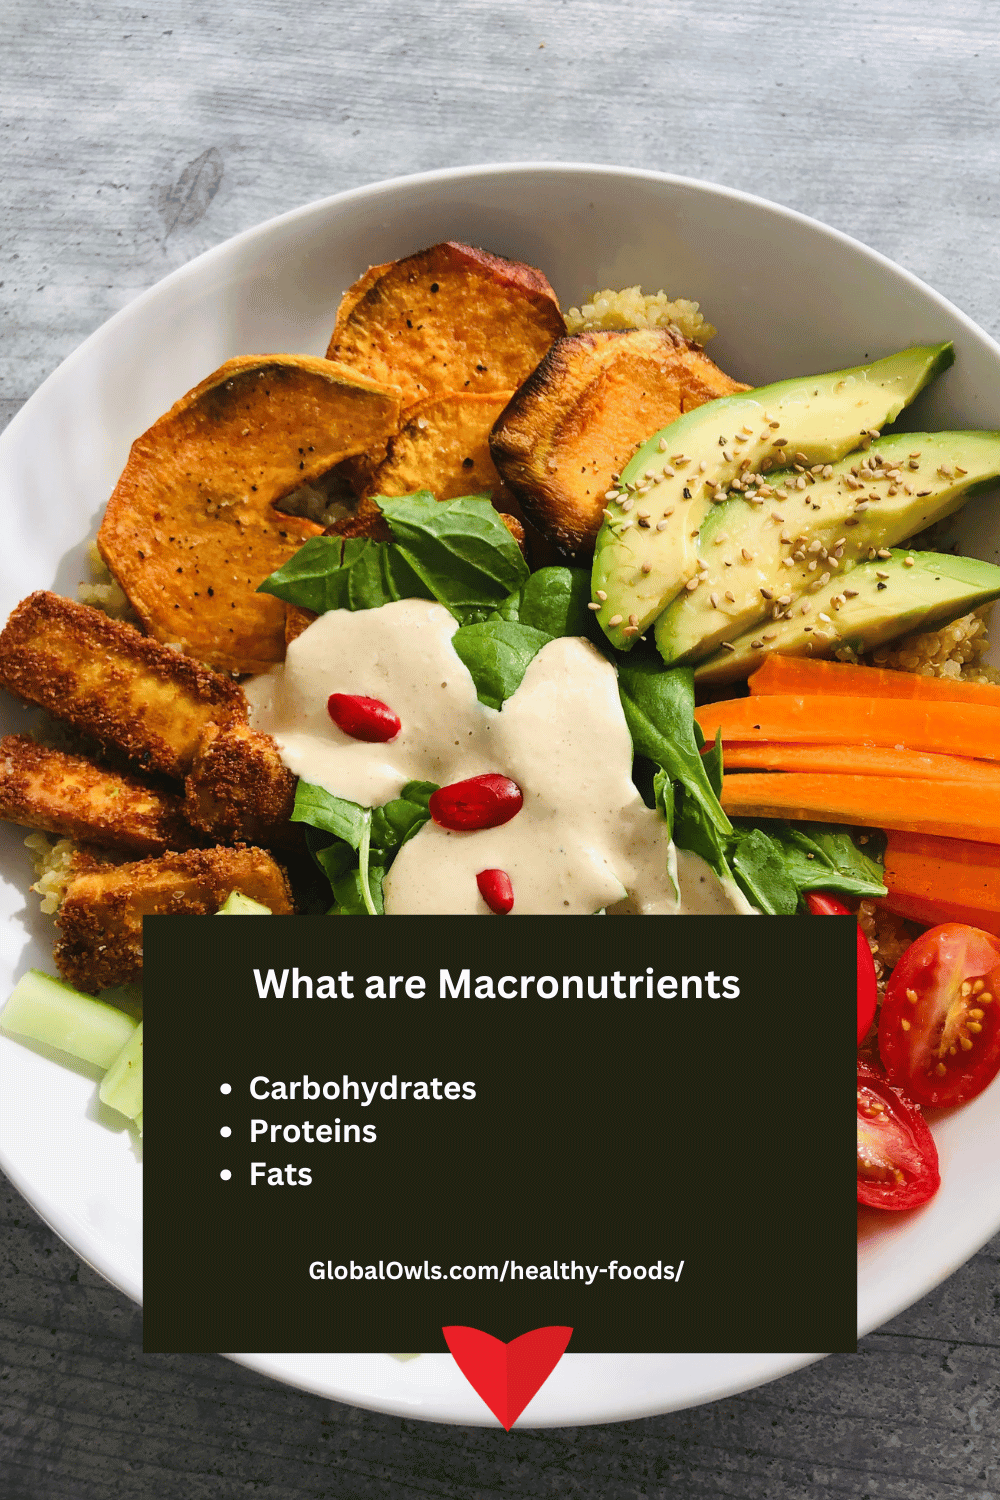 What are Macronutrients